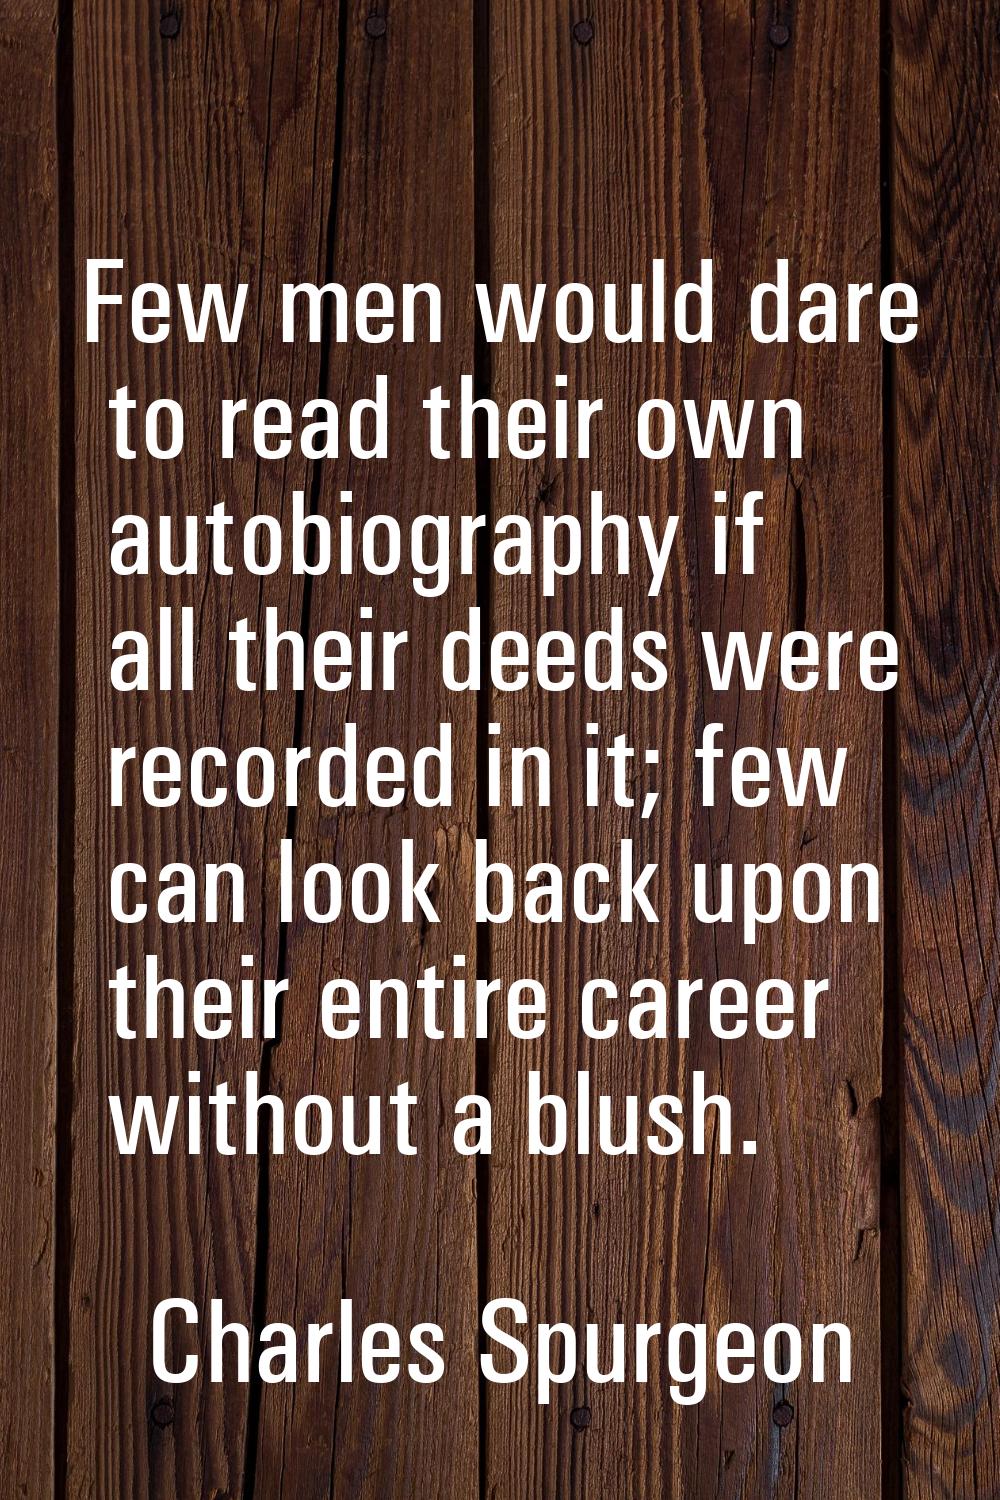 Few men would dare to read their own autobiography if all their deeds were recorded in it; few can 